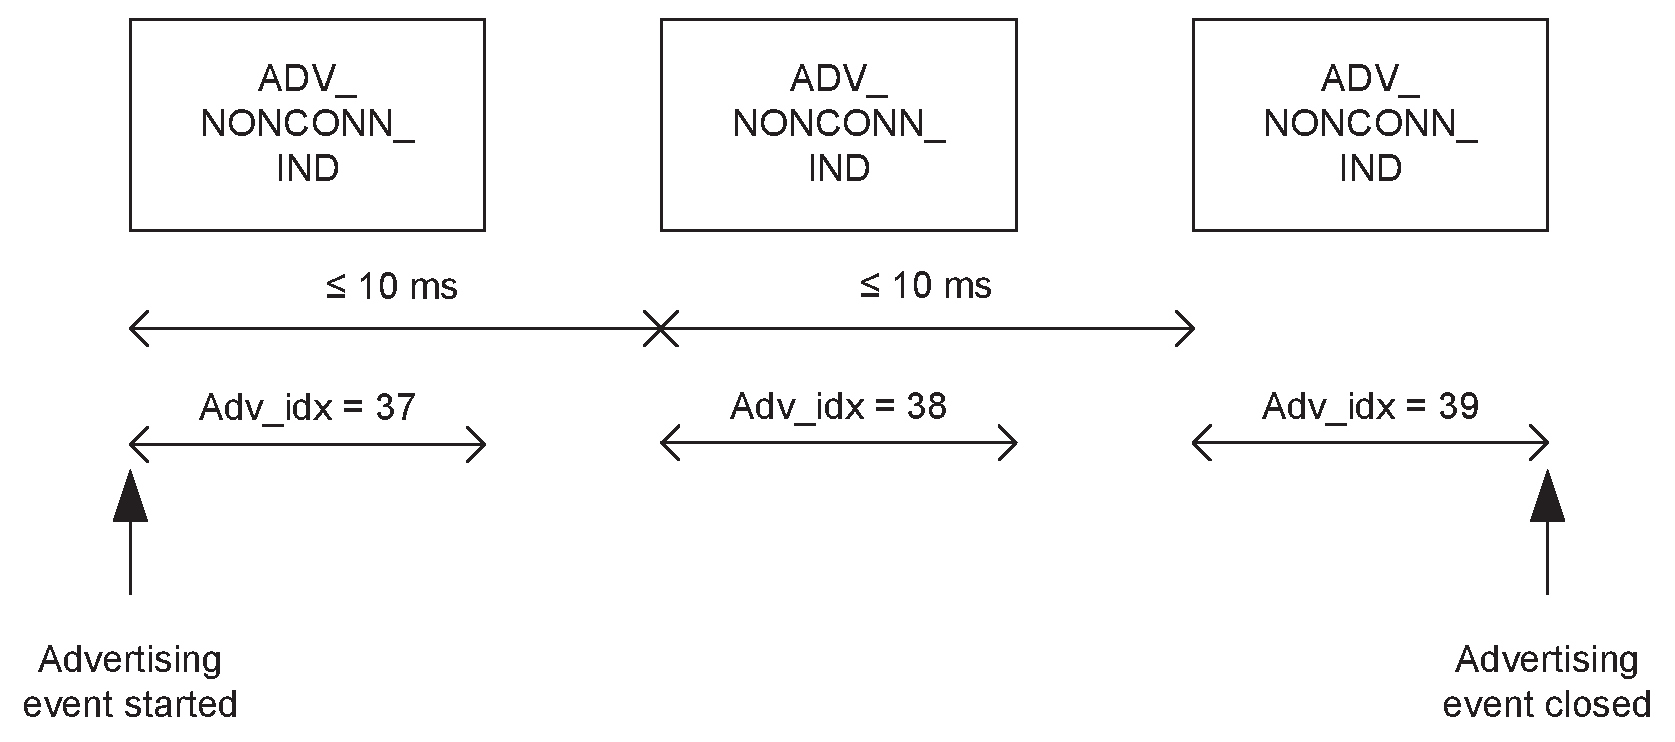 Non-connectable and non-scannable undirected advertising event using ADV_NONCONN_IND PDUs